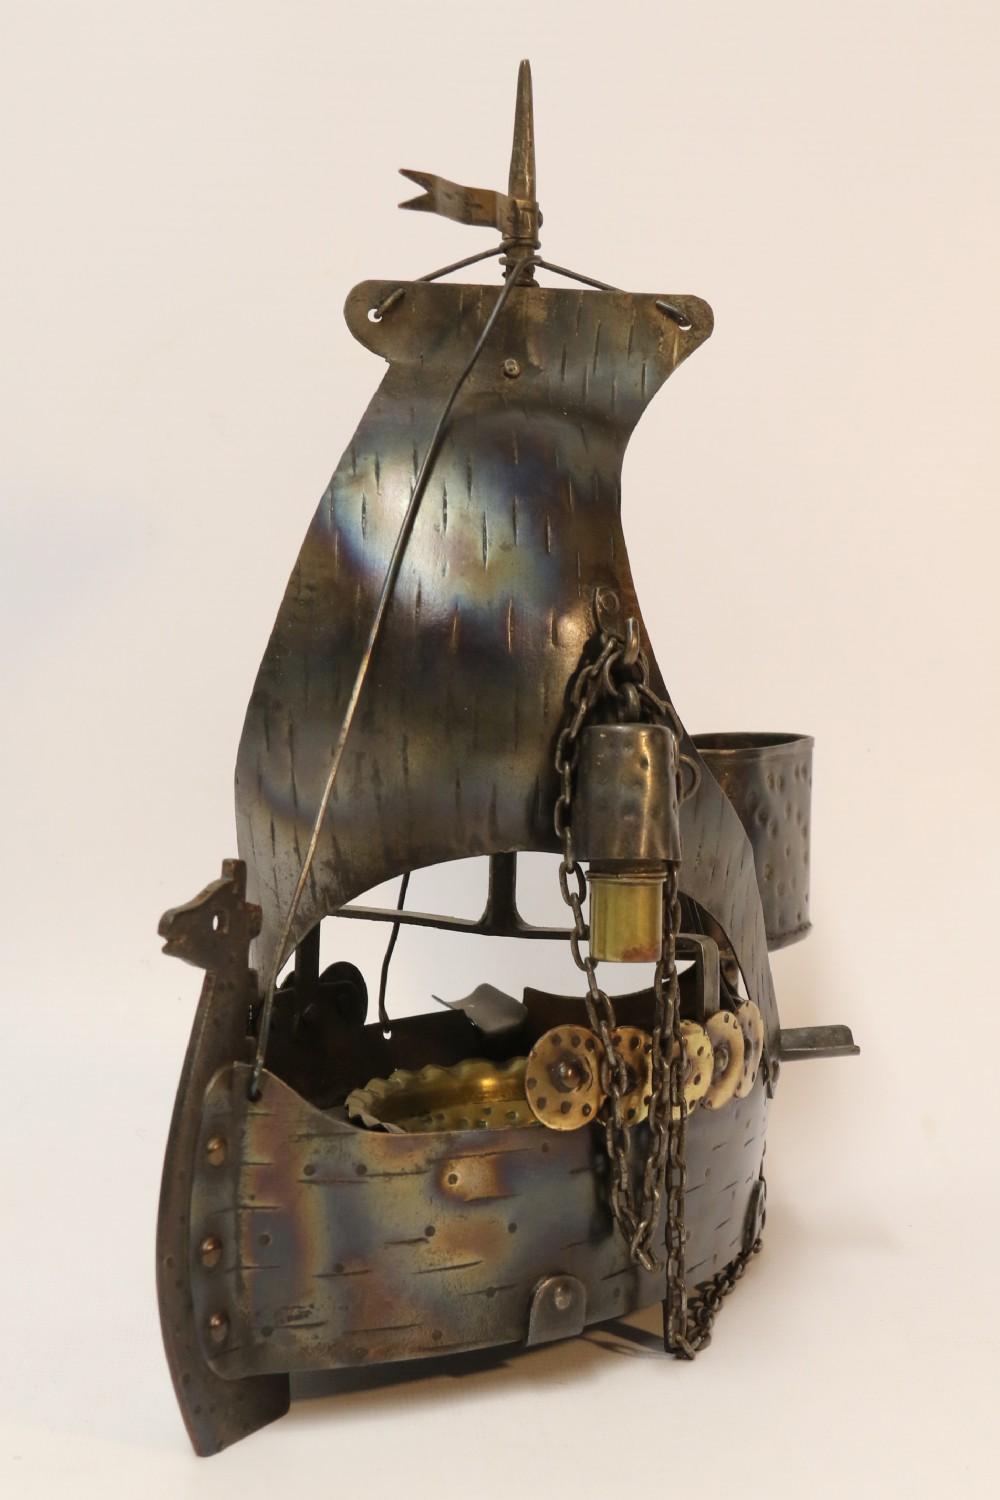 This stylish craftsman's made one off Arts & Crafts piece has been made in the form of a Viking long boat out of wrought steel which has been shaped and rivetted with hammered texturing and a heat blued finish. It comprises of the main vessel which